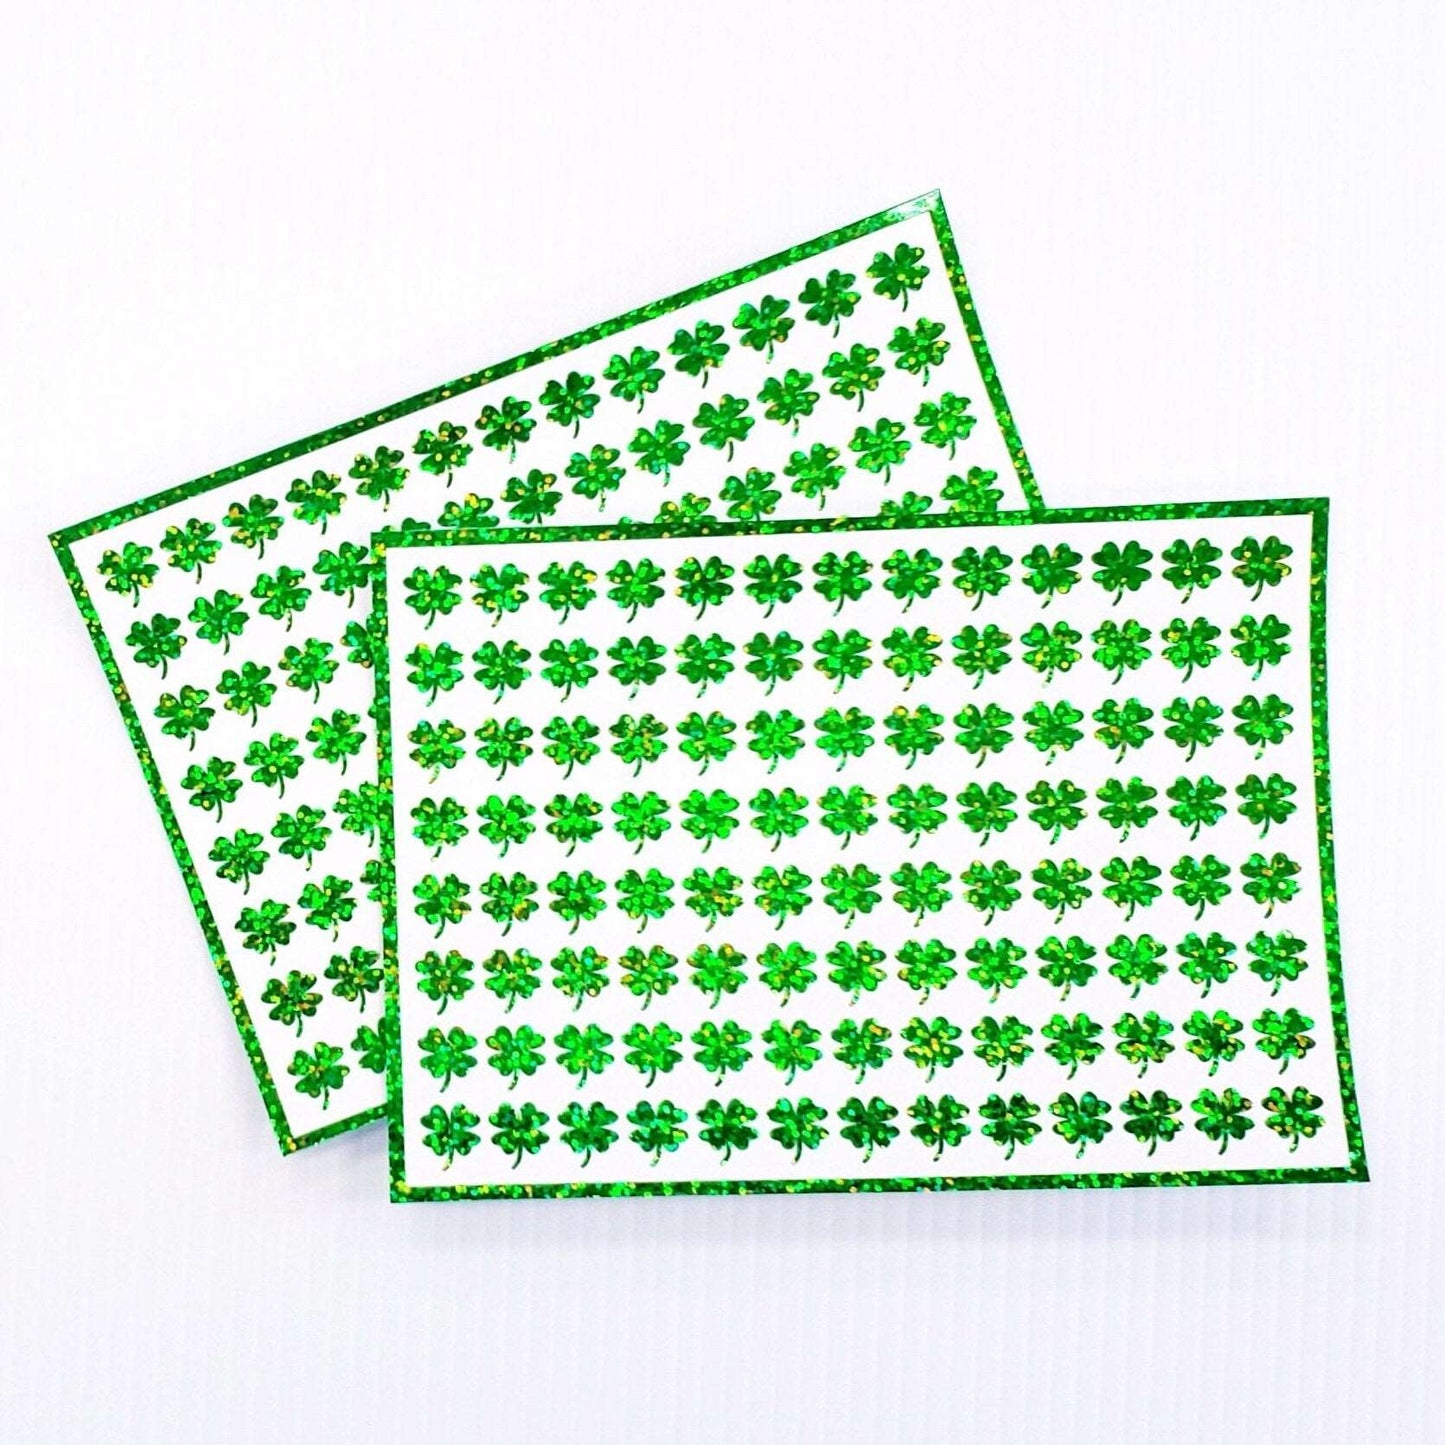 Green Clovers Sticker Sheet. Set of 104 four leaf clover glitter vinyl decals for teachers, journals and crafts. St. Patrick's Day Stickers.